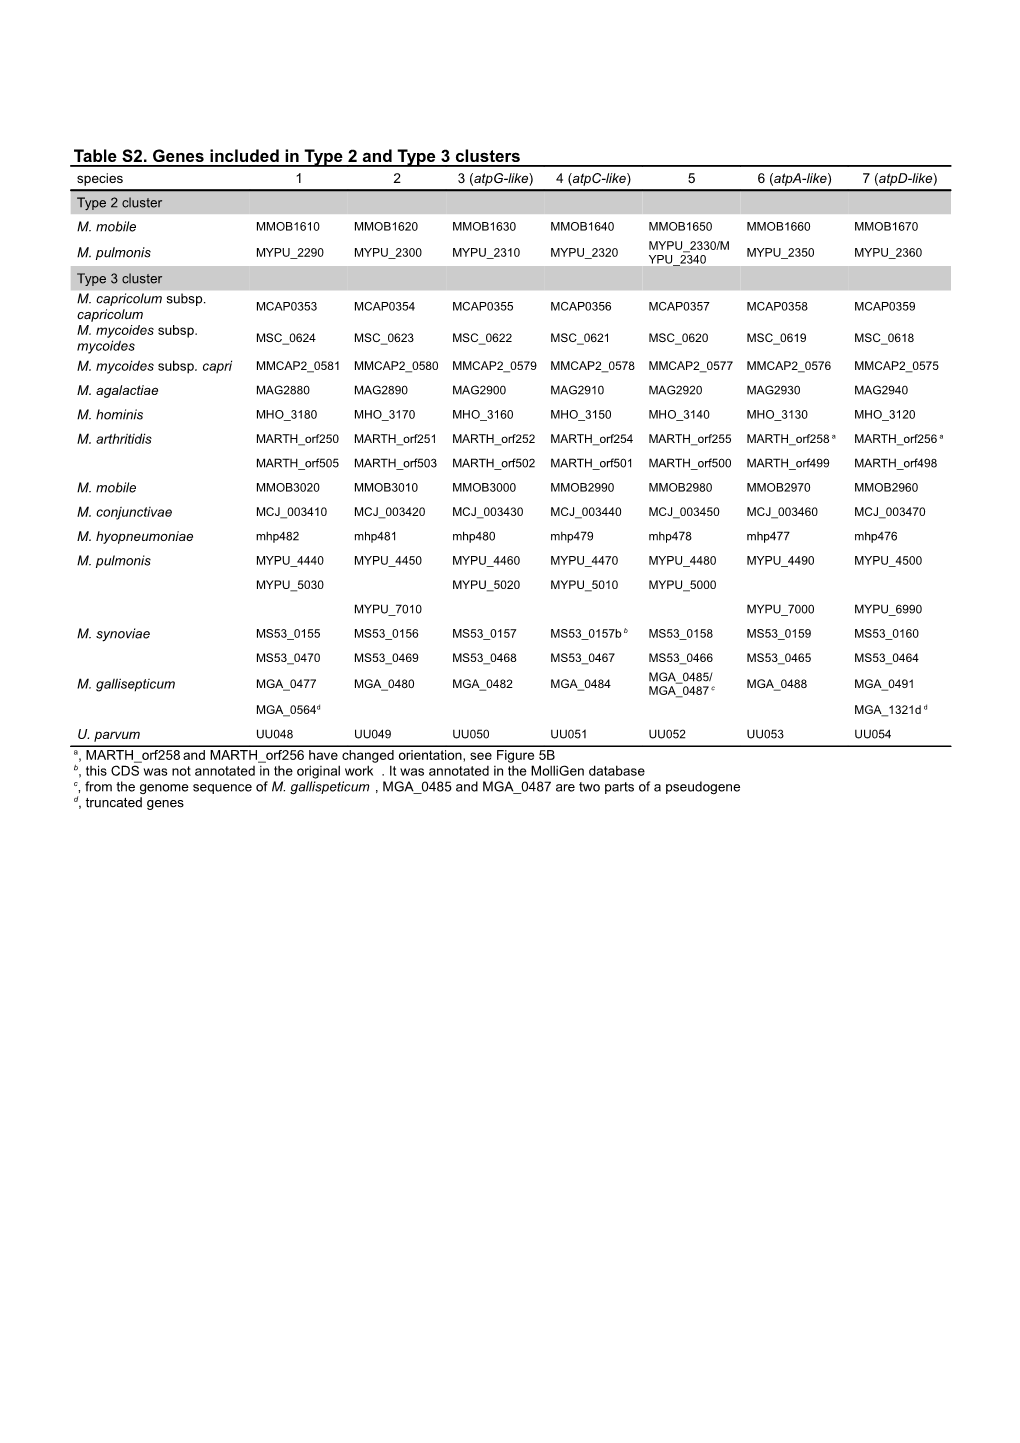 Table S2. Genes Included in Type 2 and Type 3 Clusters